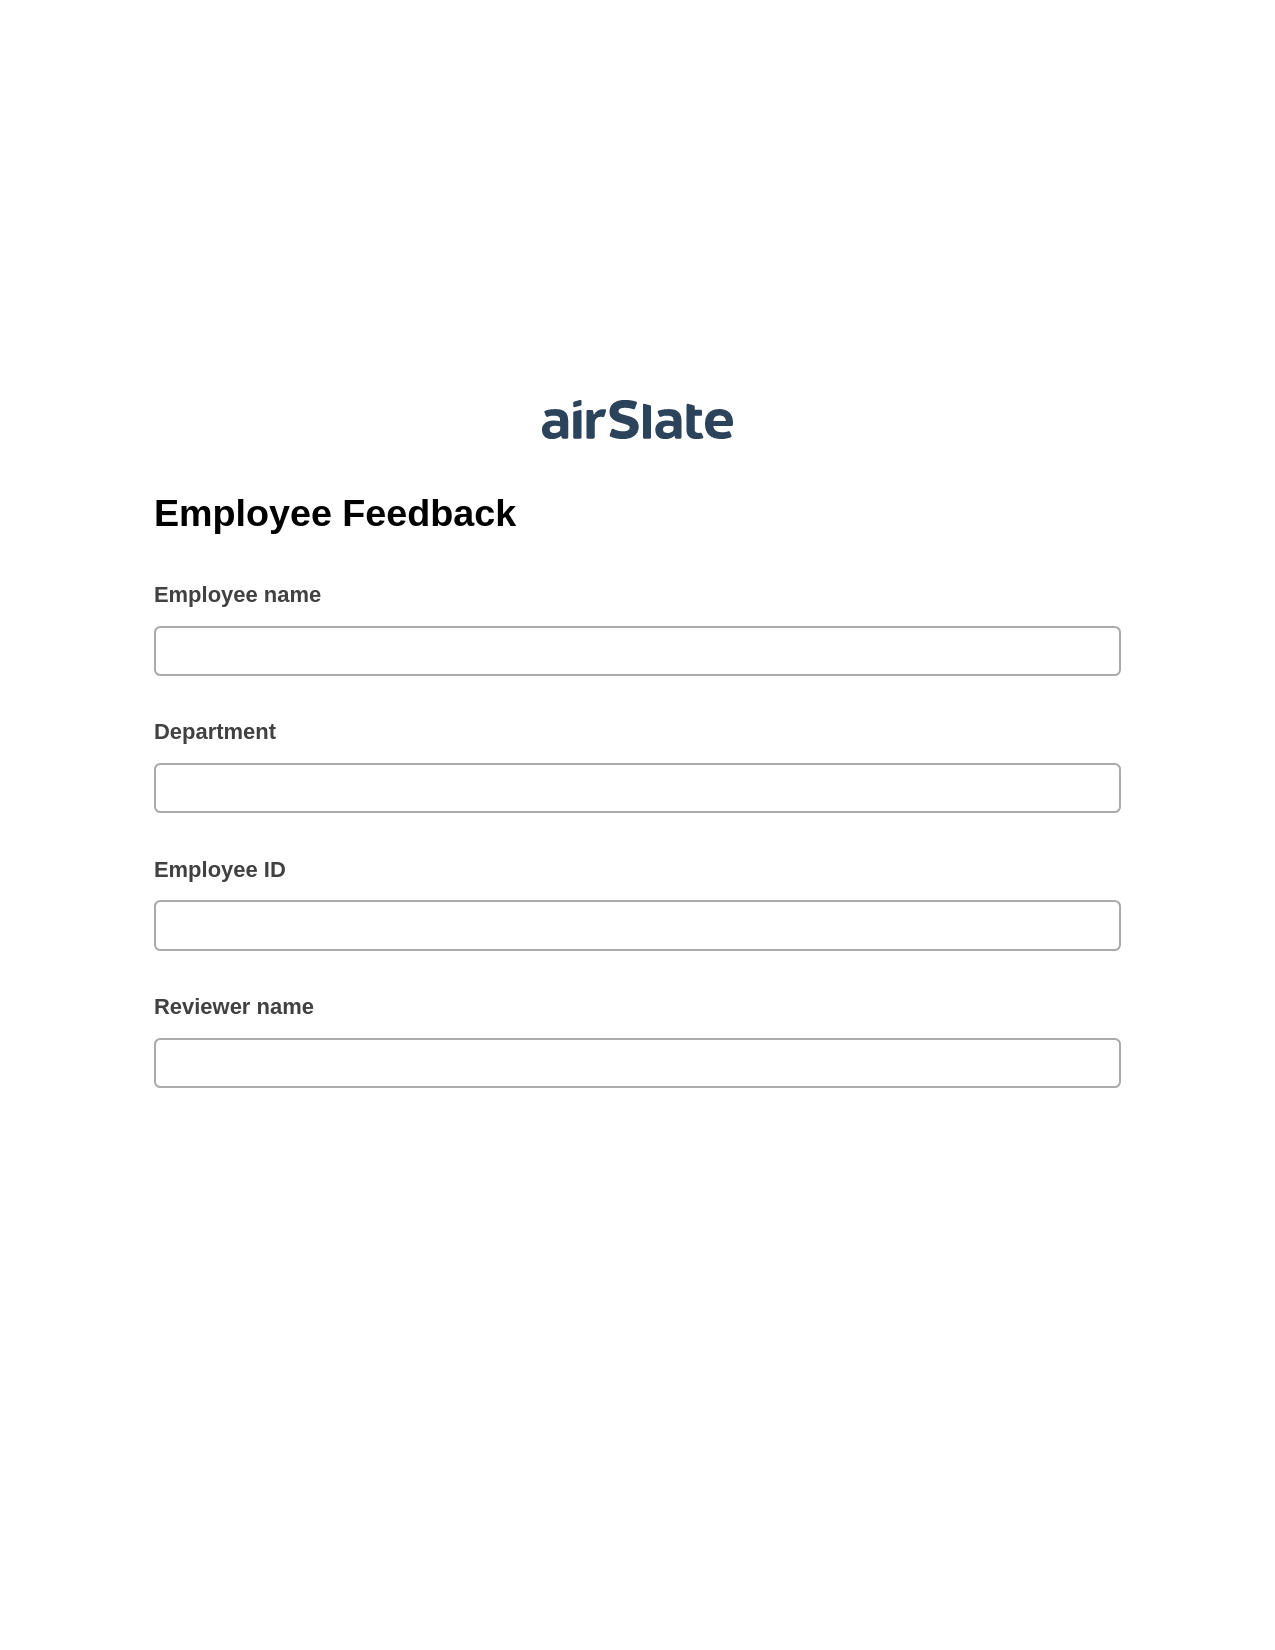 Employee Feedback Pre-fill Dropdown from Airtable, Update MS Dynamics 365 Record Bot, Google Drive Bot